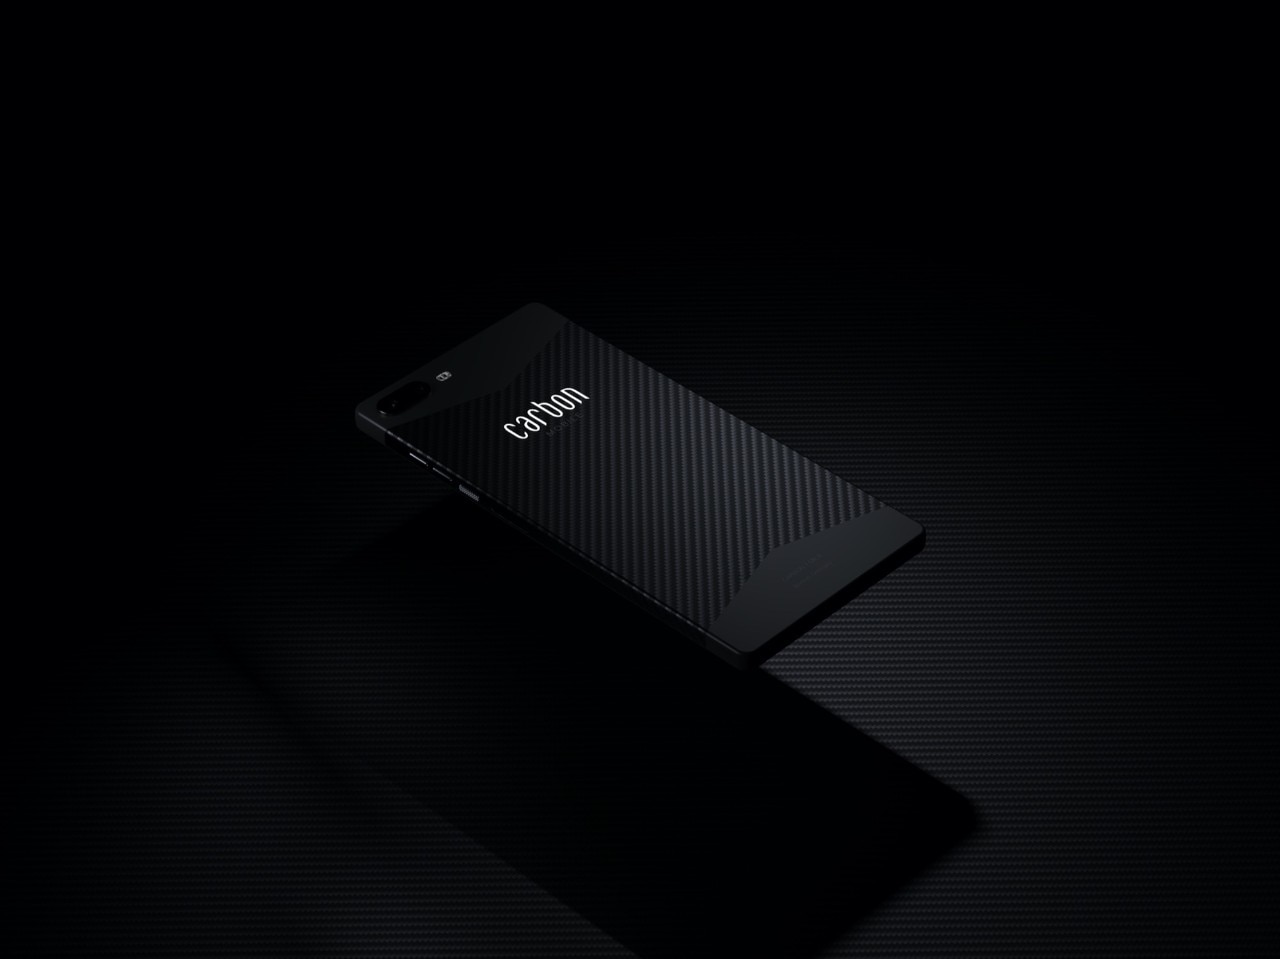 Carbon 1 MK II is a carbon fibre smartphone “inspired by the